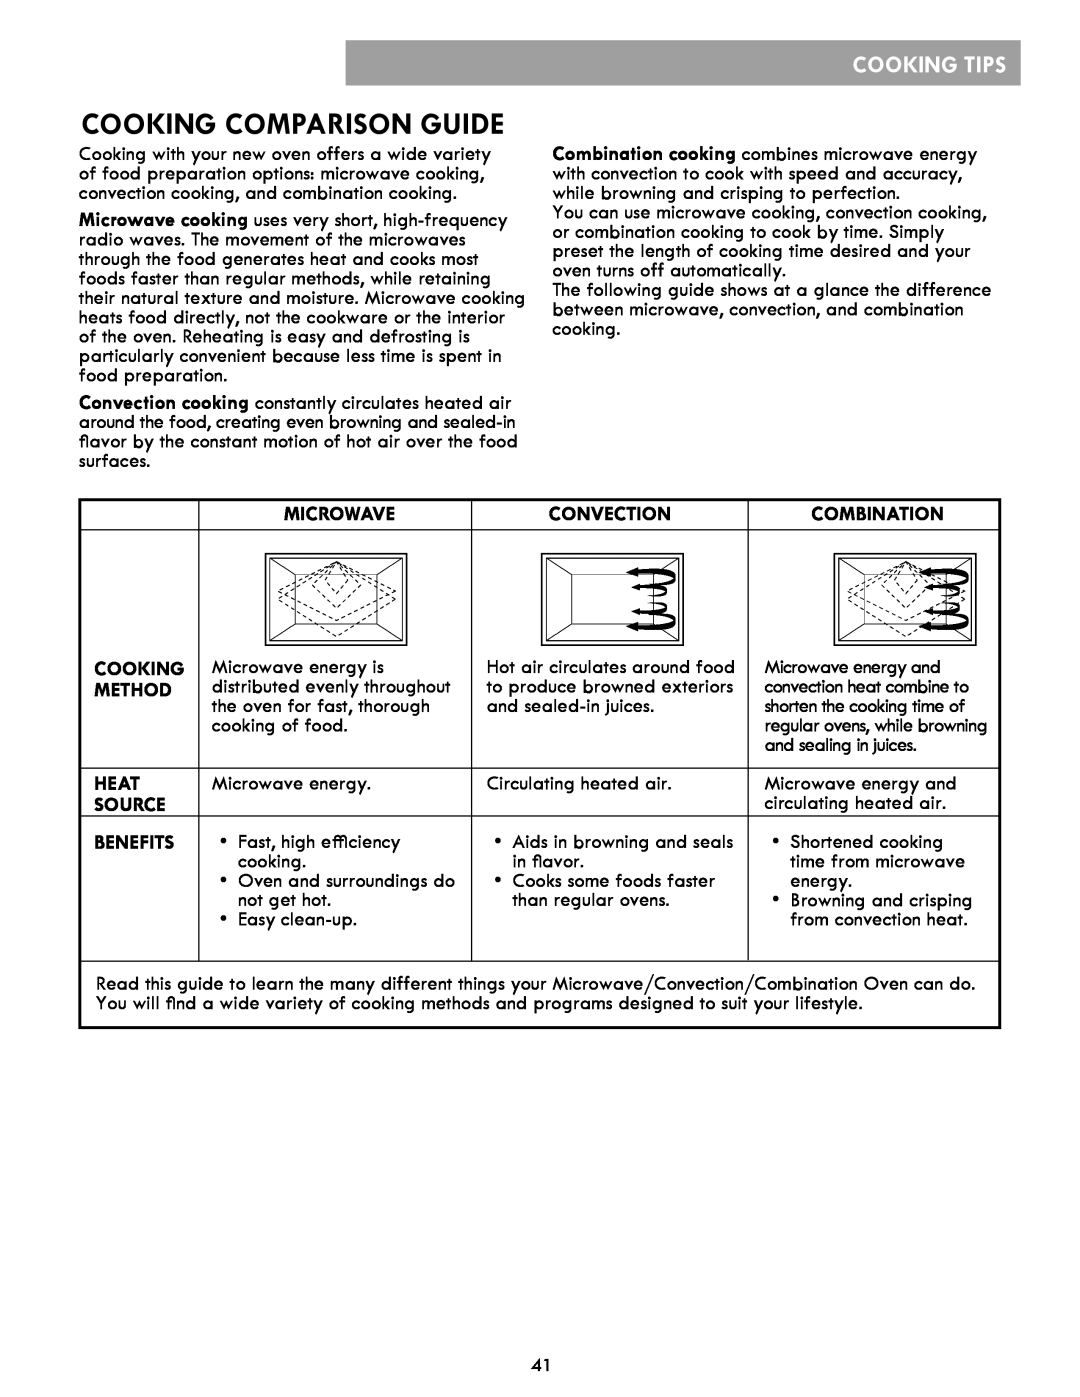 Kenmore 721.86012, 86013 manual Cooking Comparison Guide, Microwave, Convection, Combination, Method, Heat, Source, Benefits 